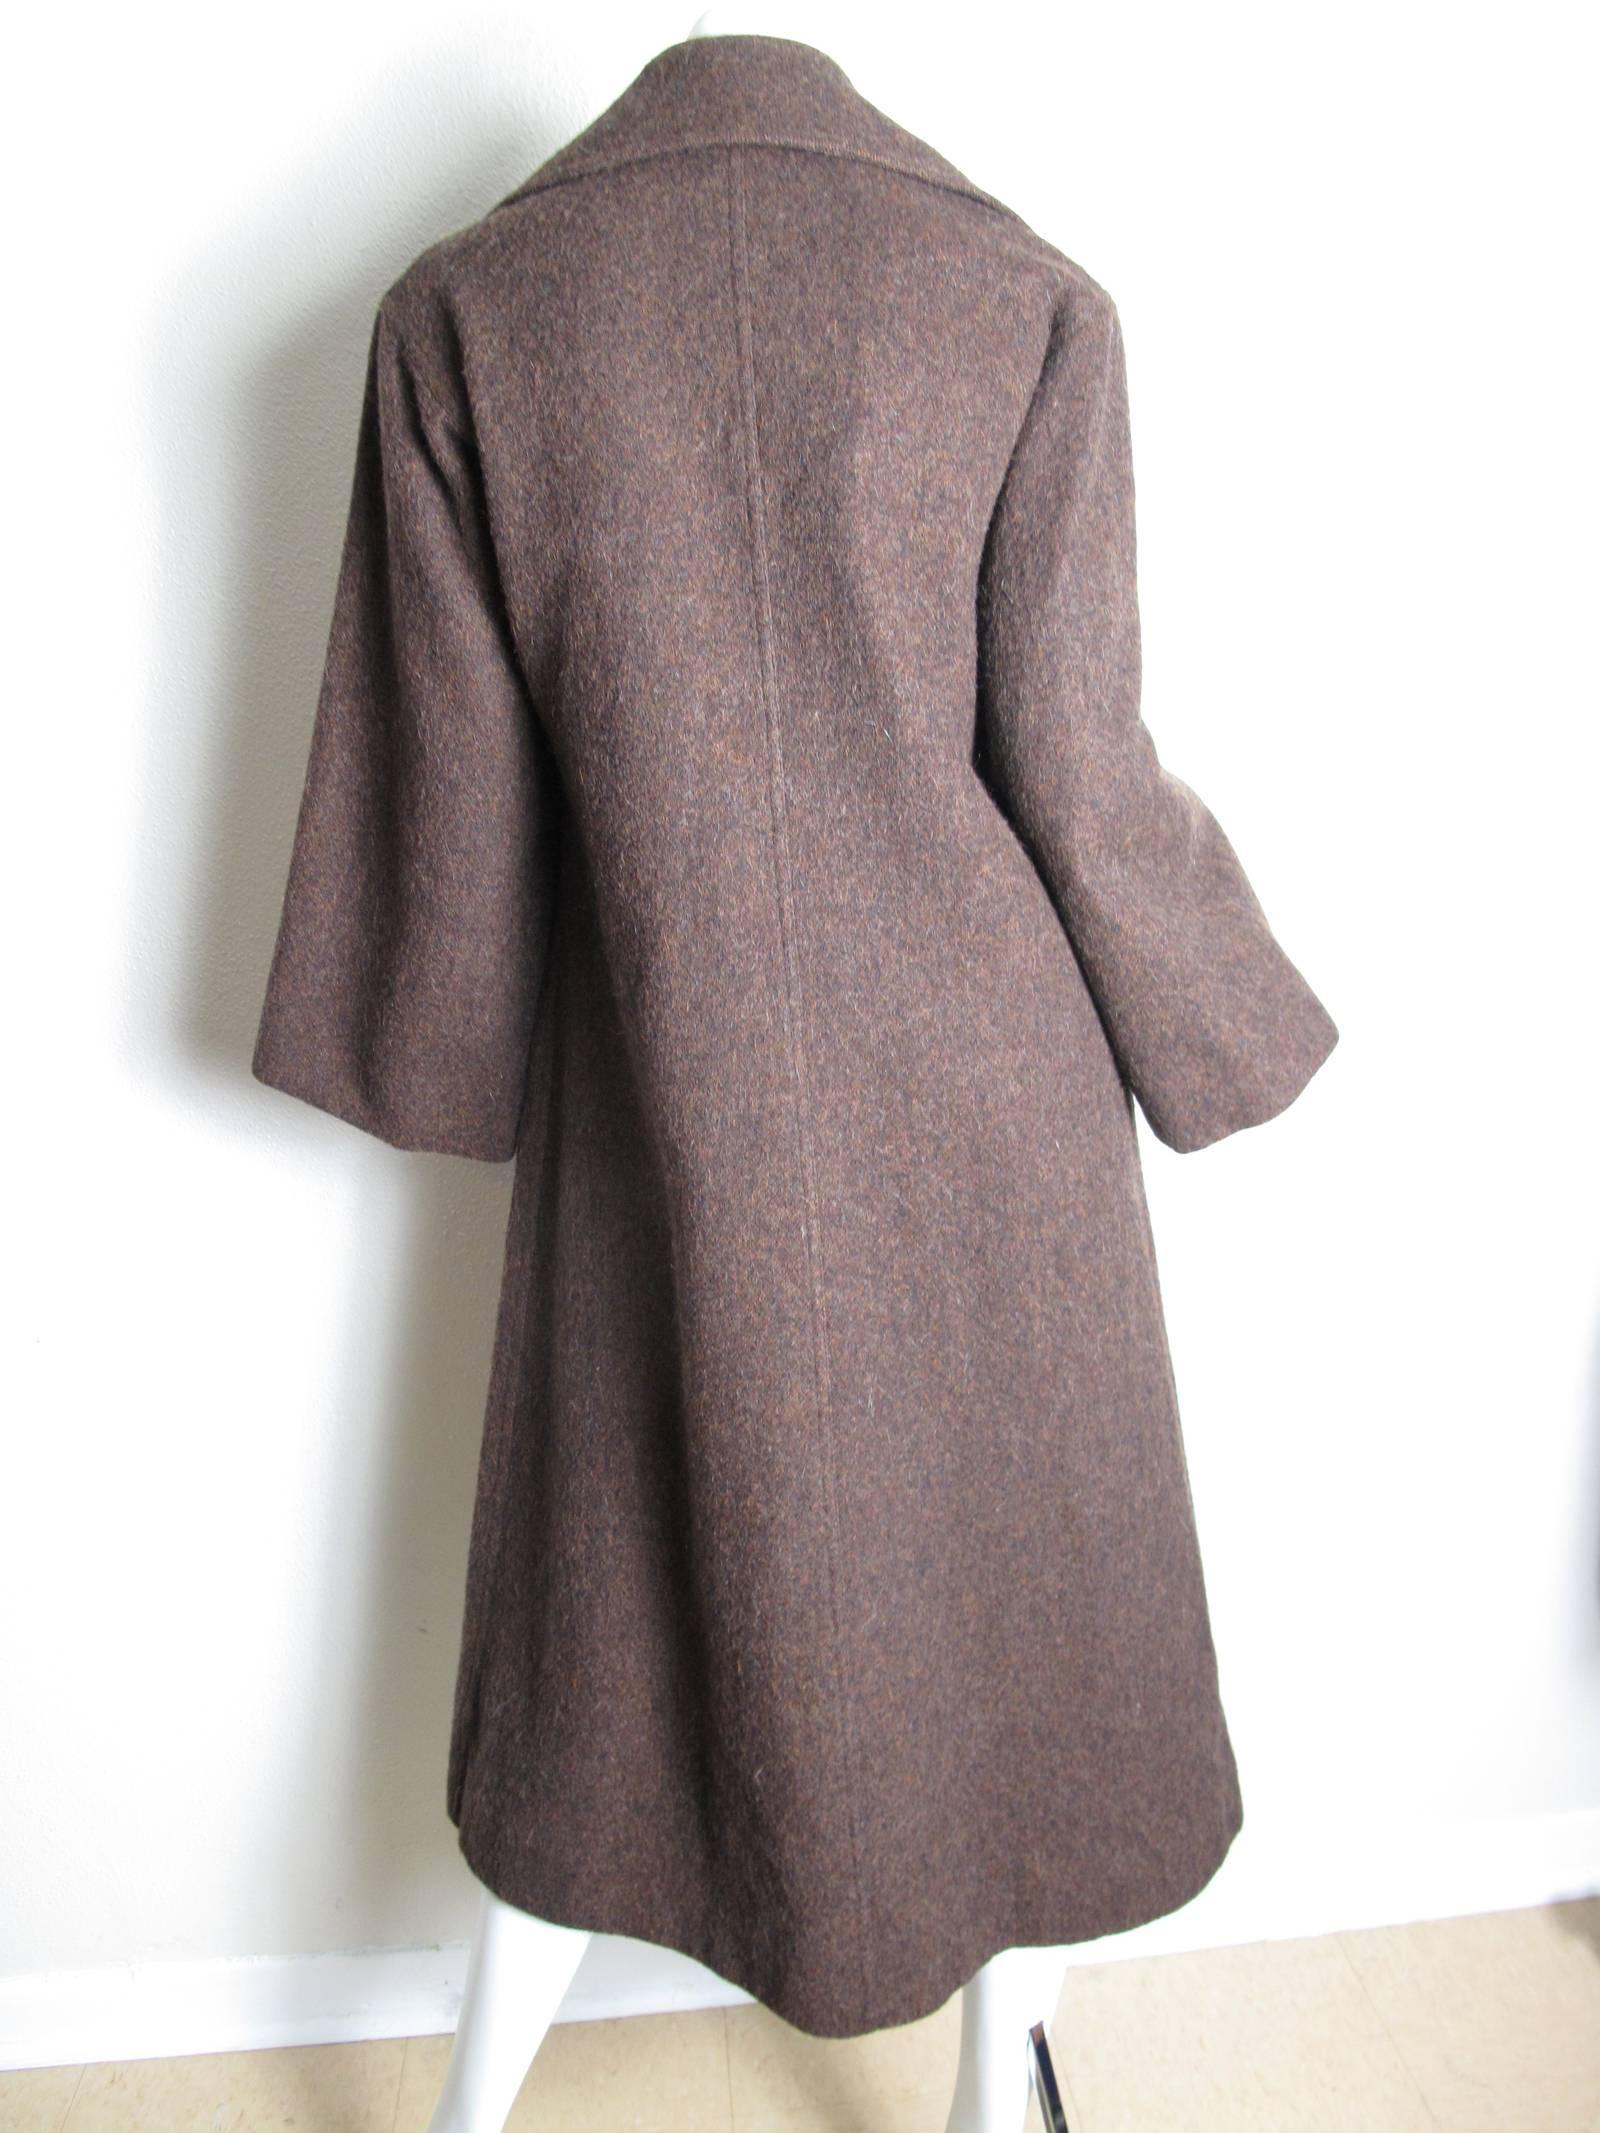 1960s brown wool coat with two front pockets. Unlined. Condition: Excellent. Size M / L

We accept returns for refund, please see our terms.   We offer free ground shipping within the US.  Please let us know if you have any questions.
